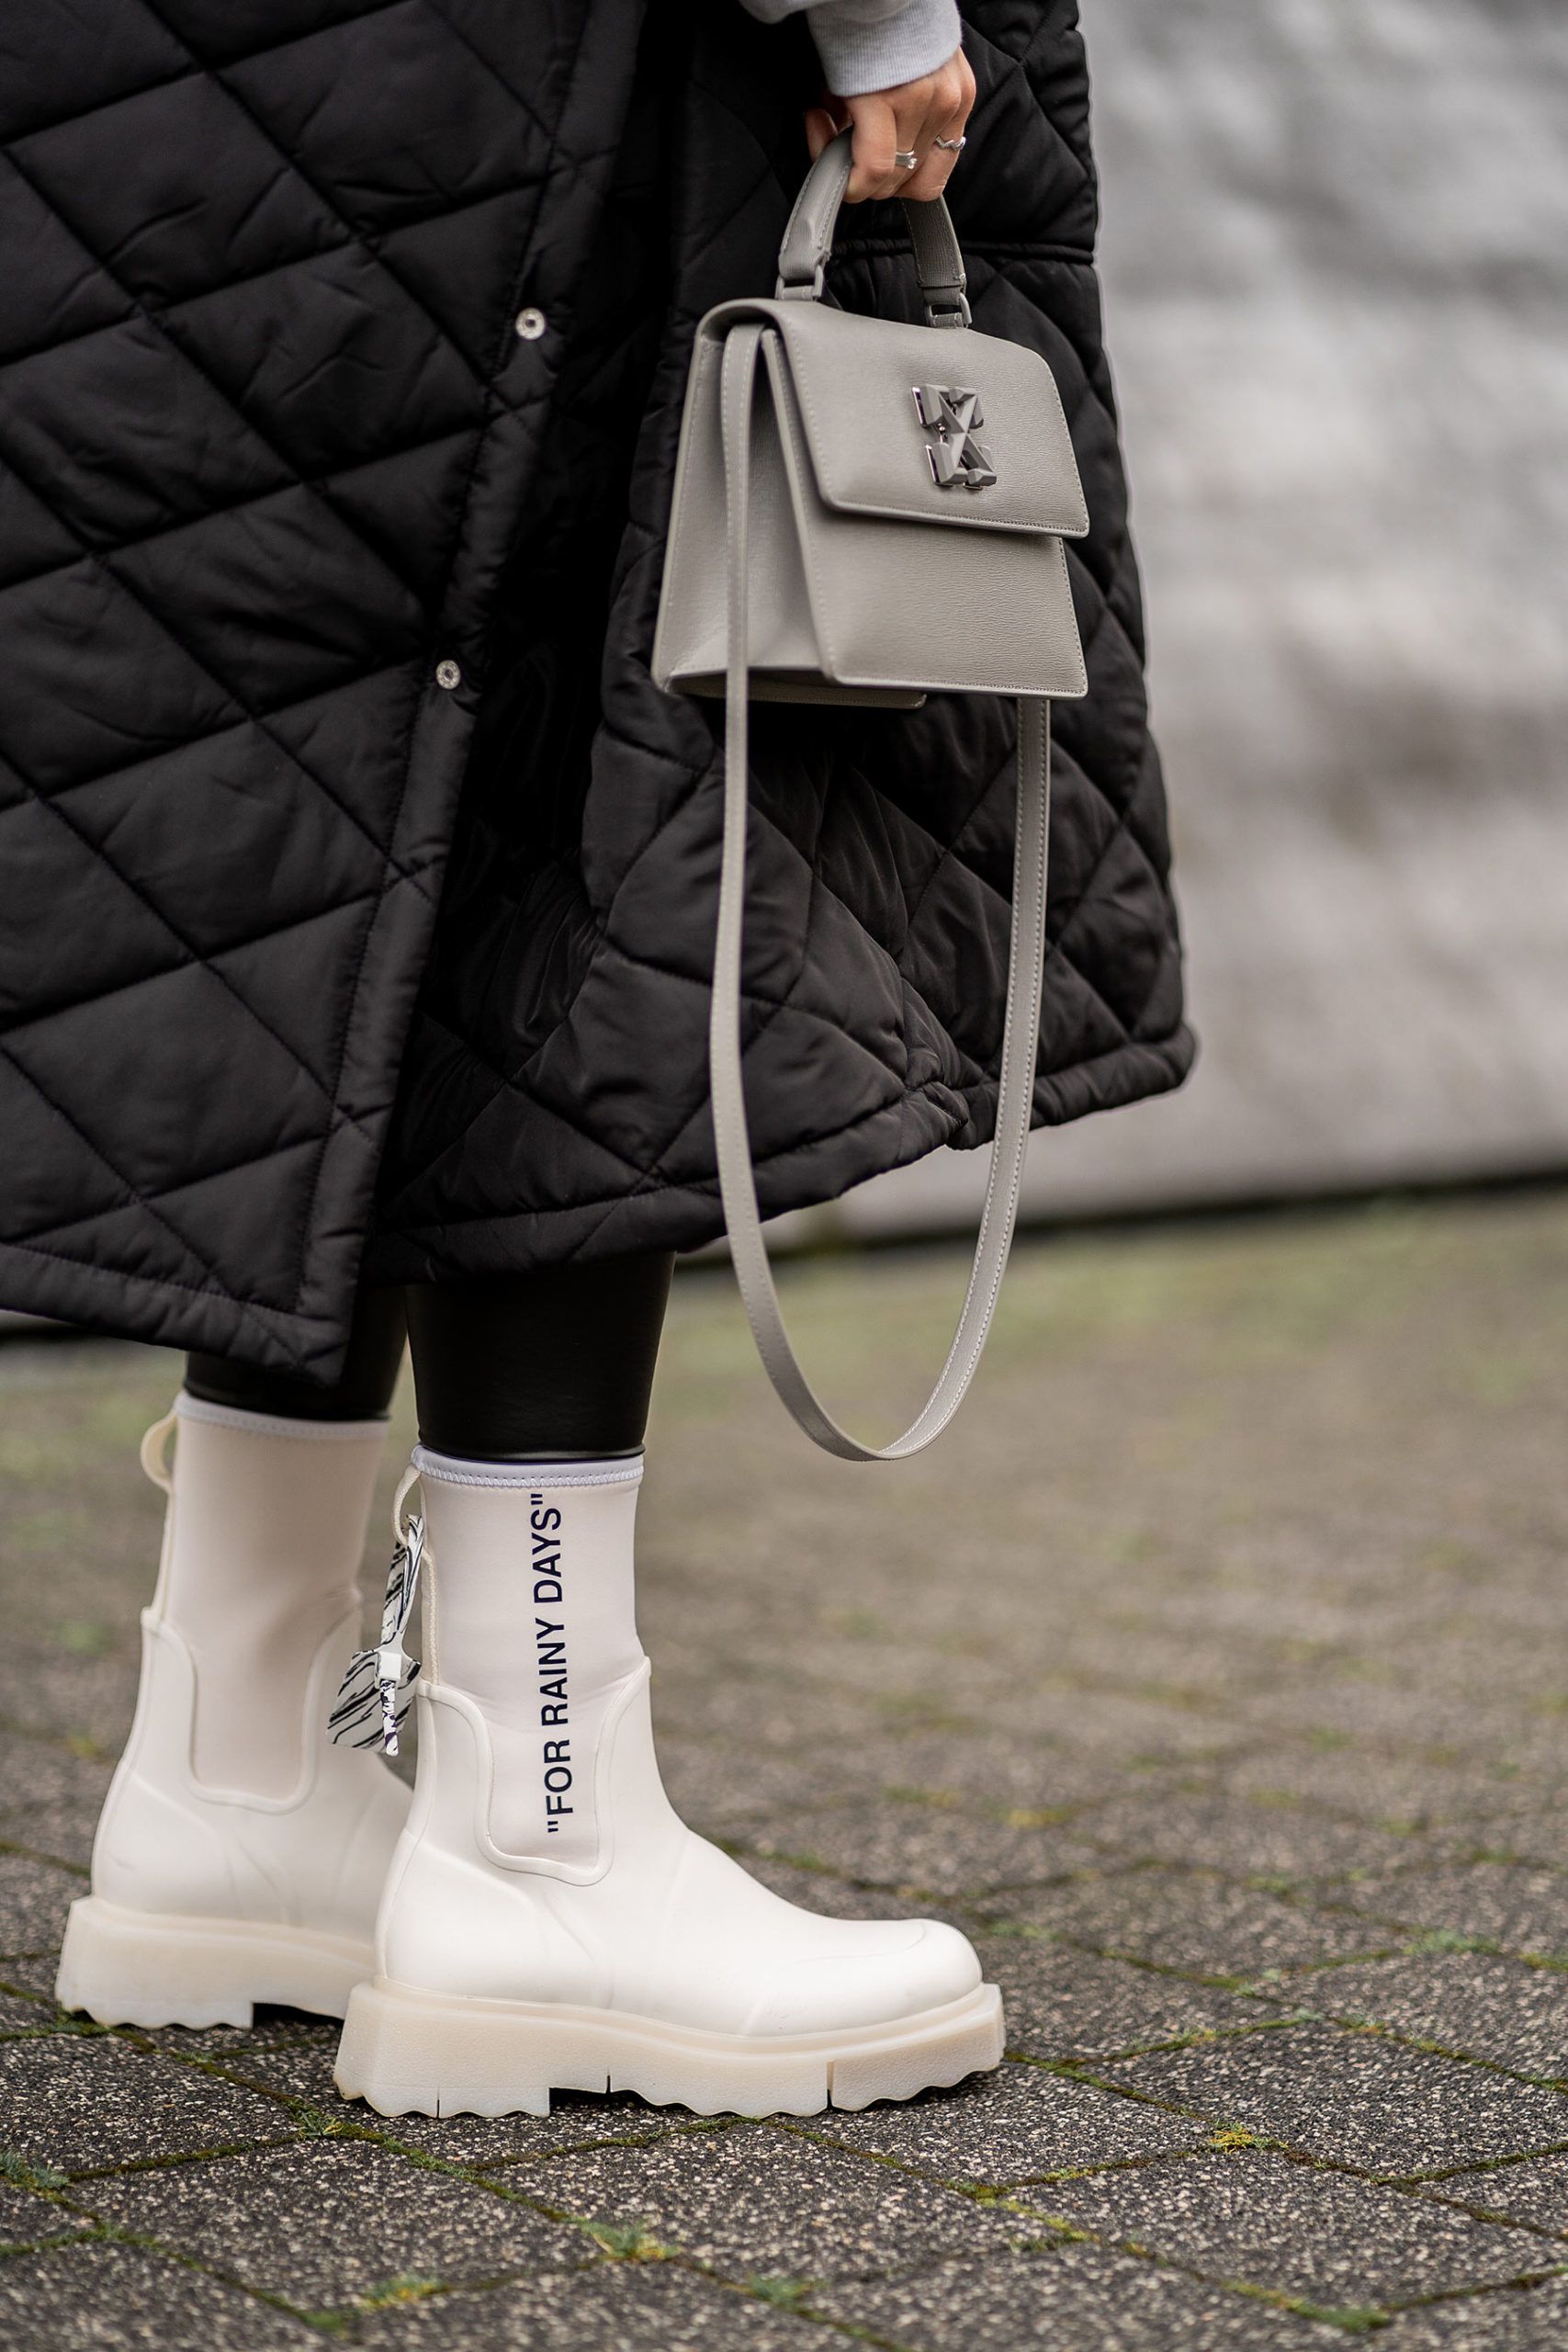 Splash-Proof Style: Chic Rainy Day Boots
Outfit Inspiration